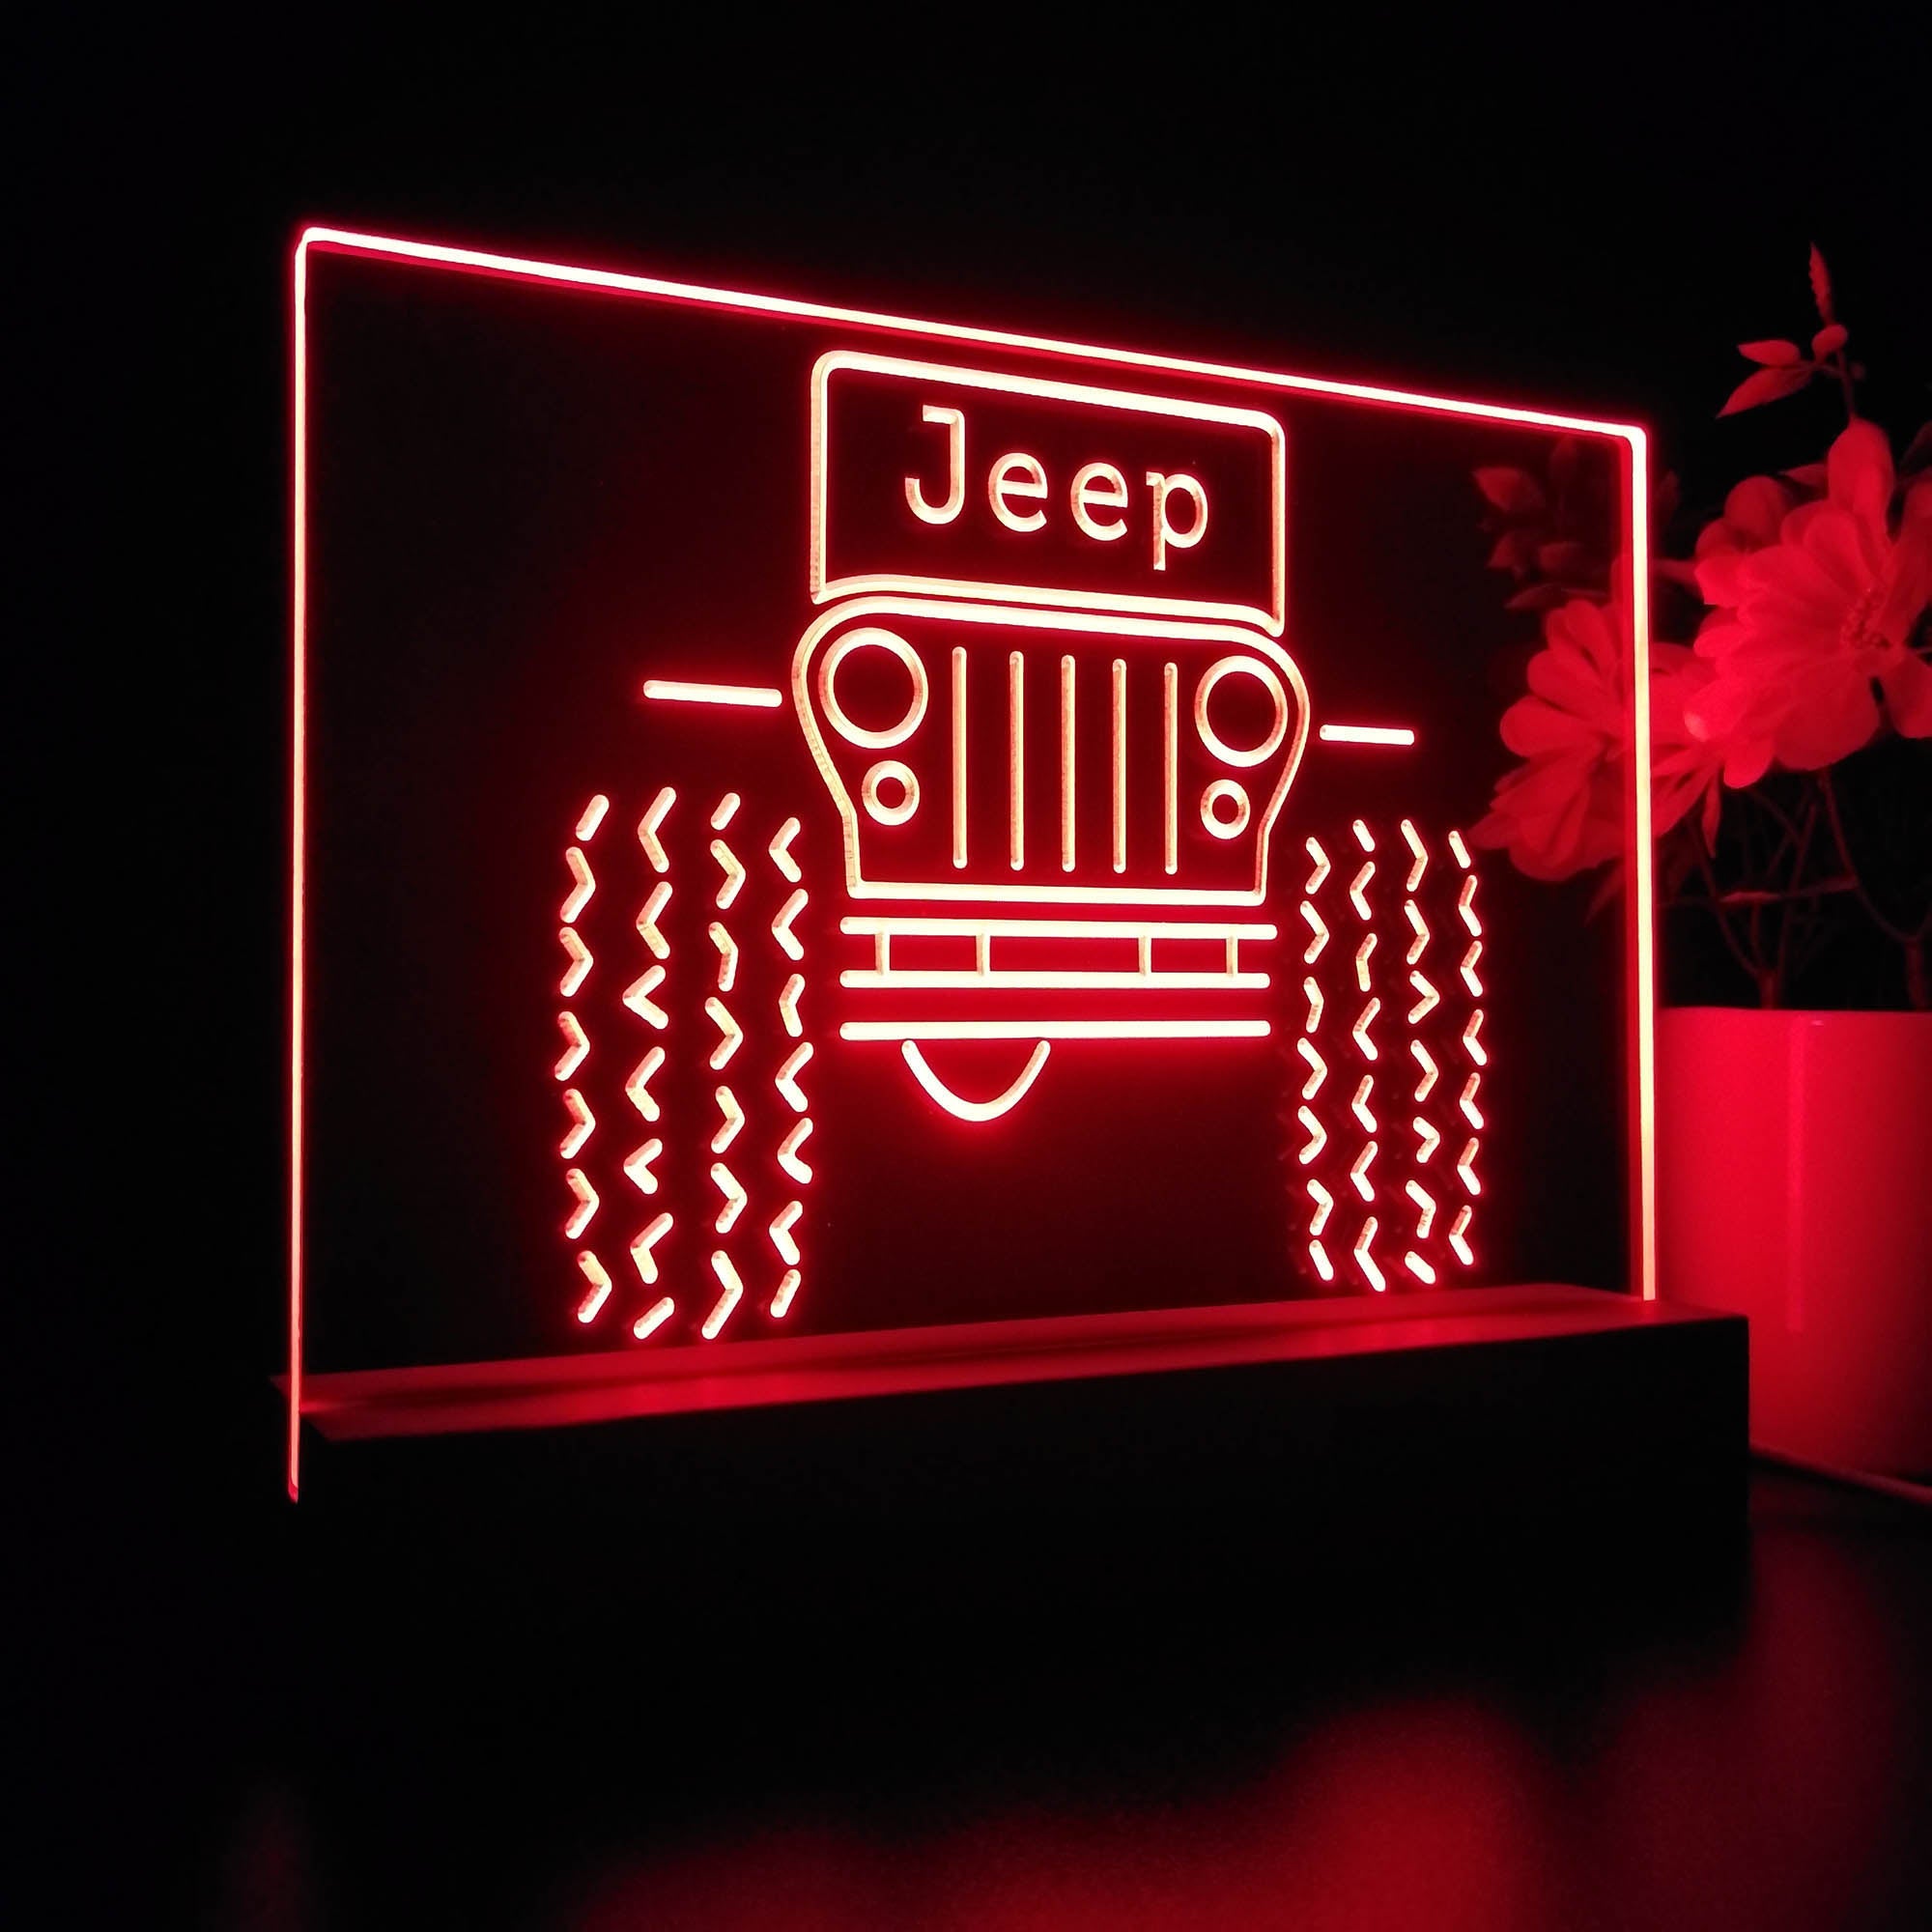 Only in a Jeep Truck Garage 3D LED Illusion Night Light